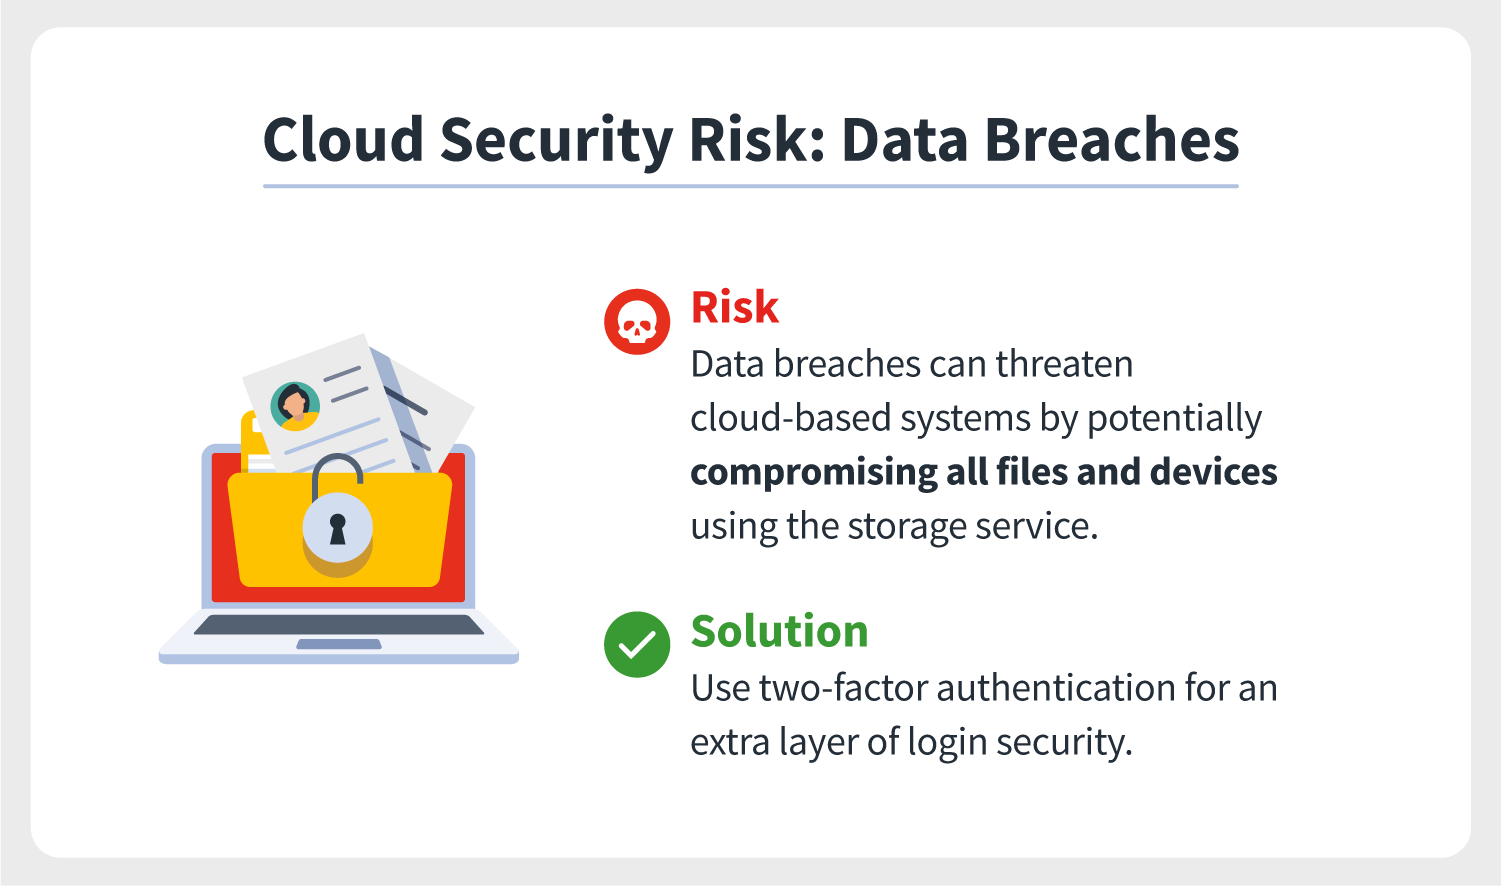 An illustration sits beside an explanation of how data breaches are among the most dangerous cloud security risks threatening private data today.